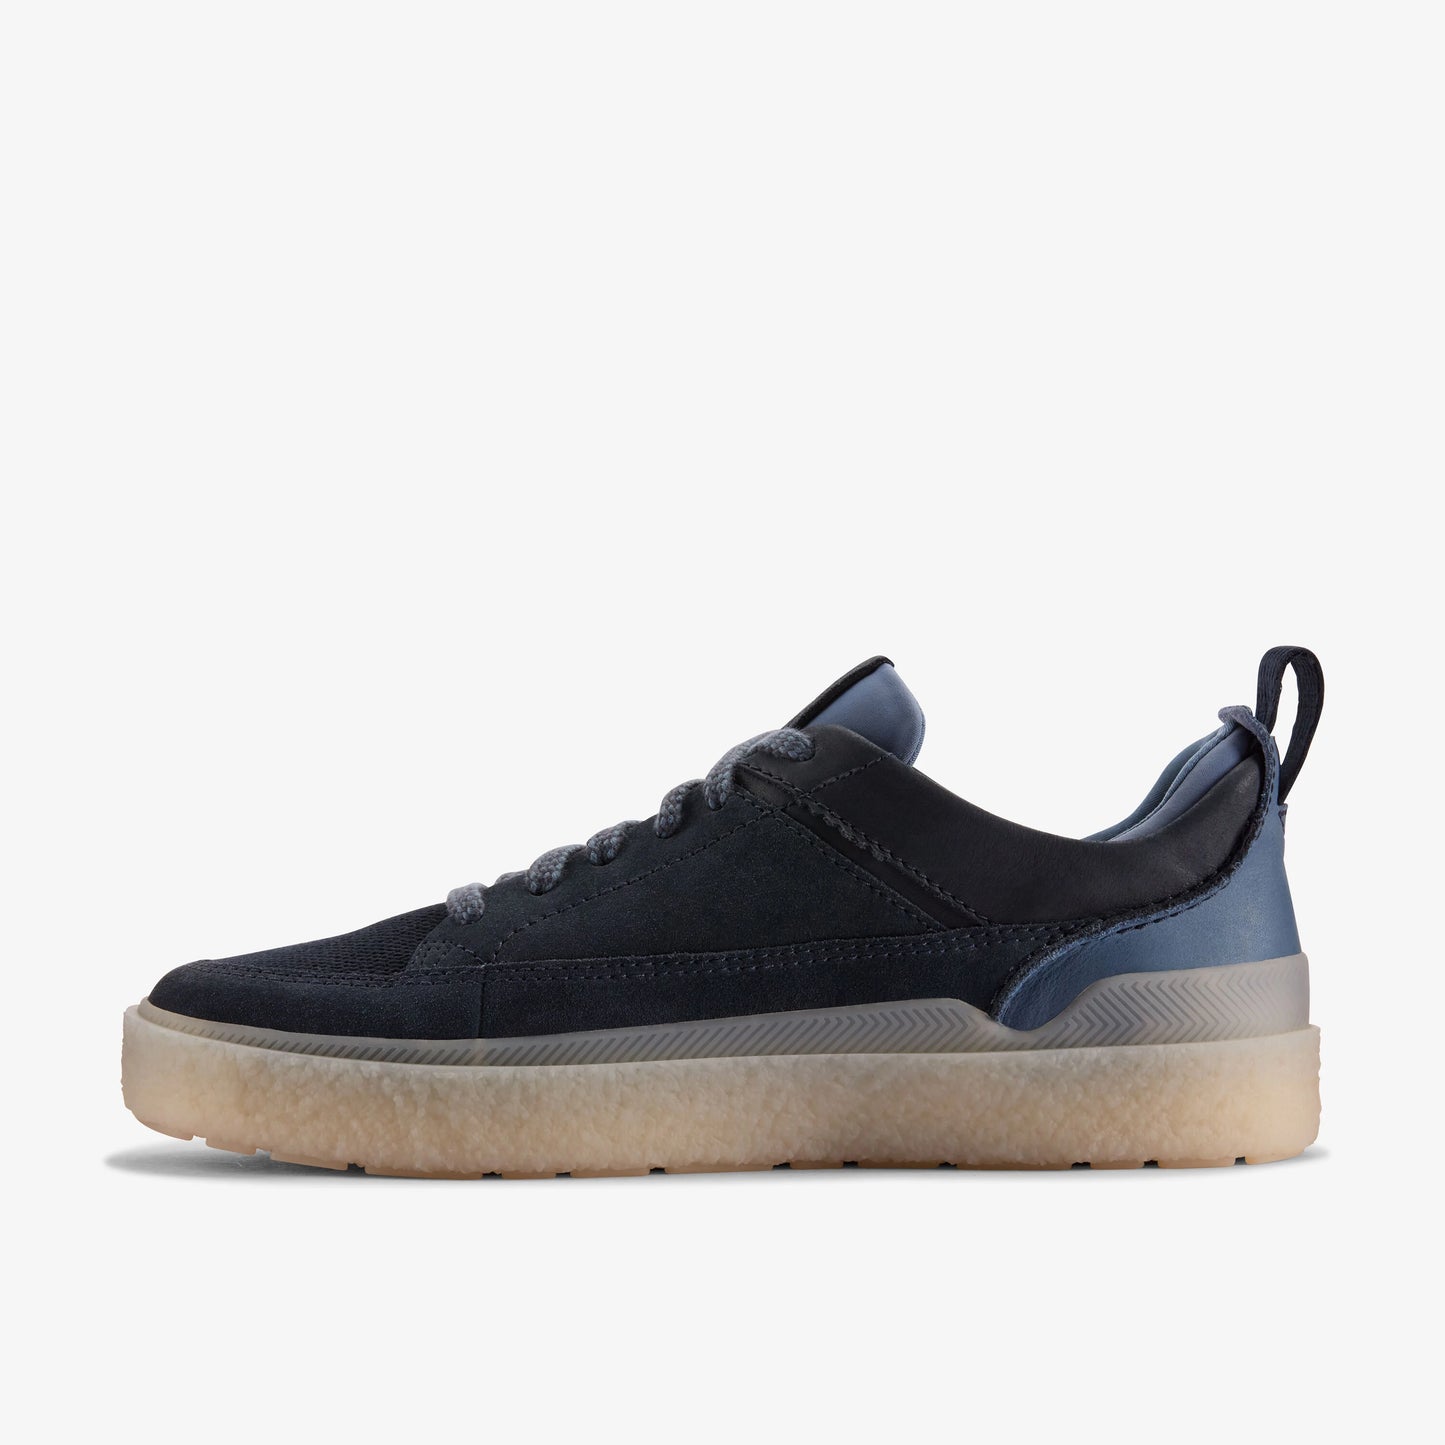 CLARKS | SABATES CASUALS PER A HOME | SOMERSET LACE NAVY SUEDE | BLAVA